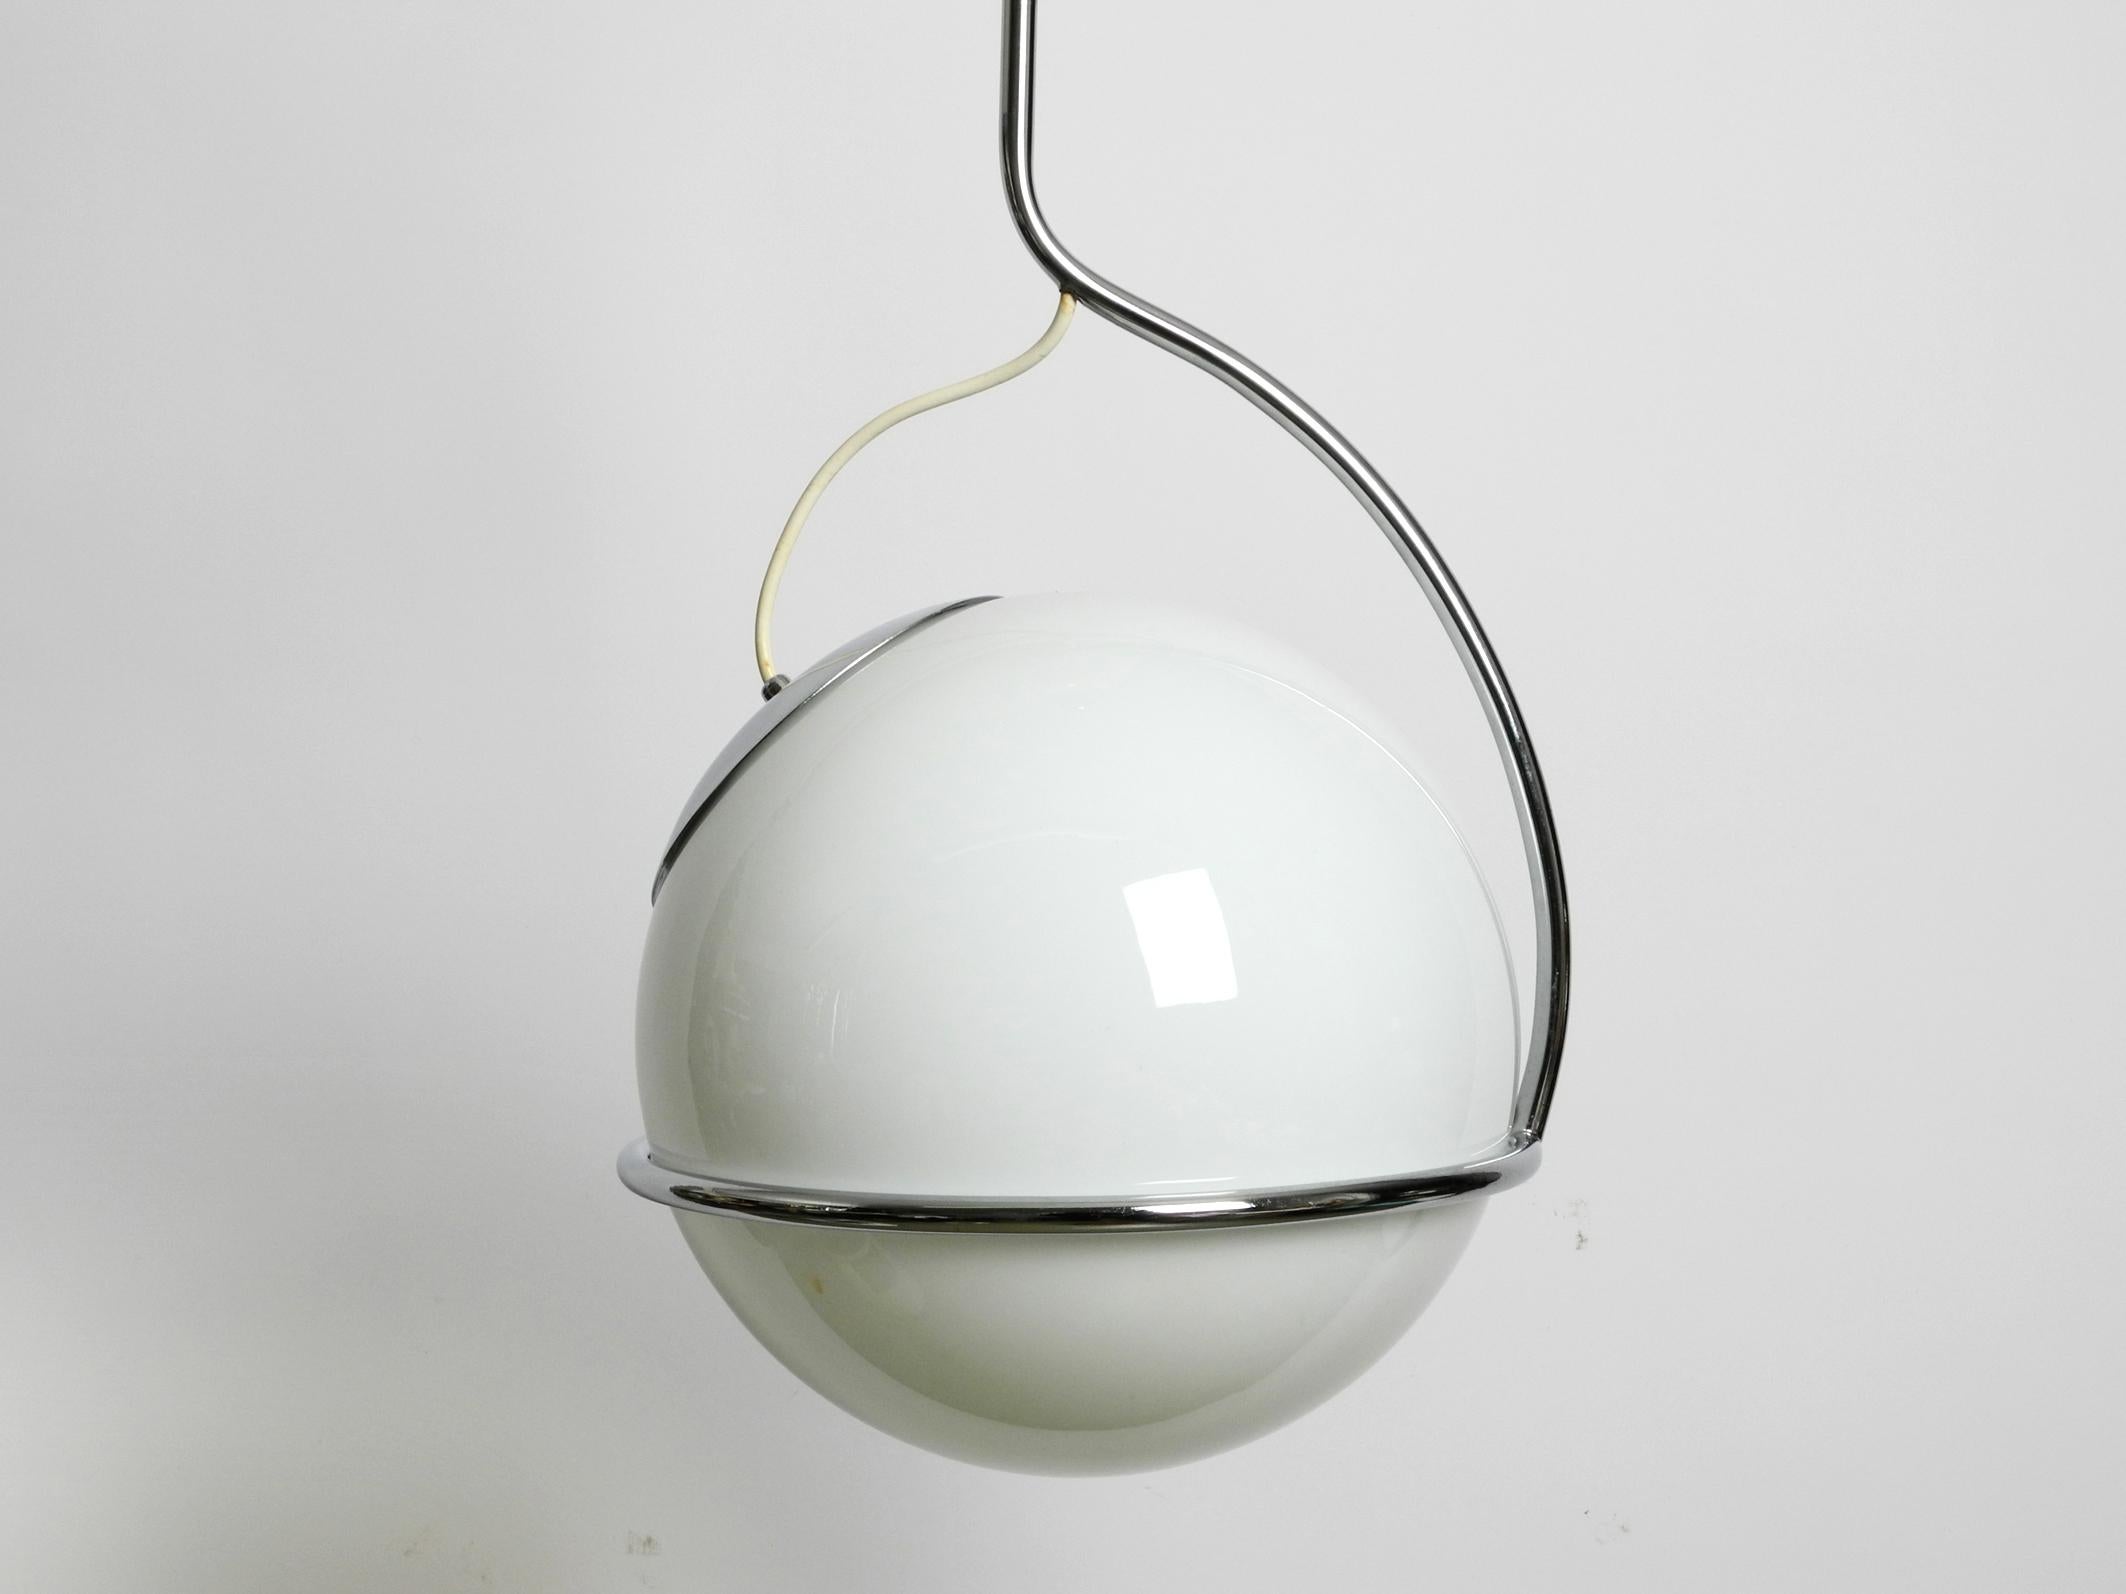 Metal Italian Space Age 60s Chromed Tubular Steel Pendant Lamp with a Large Glass Ball